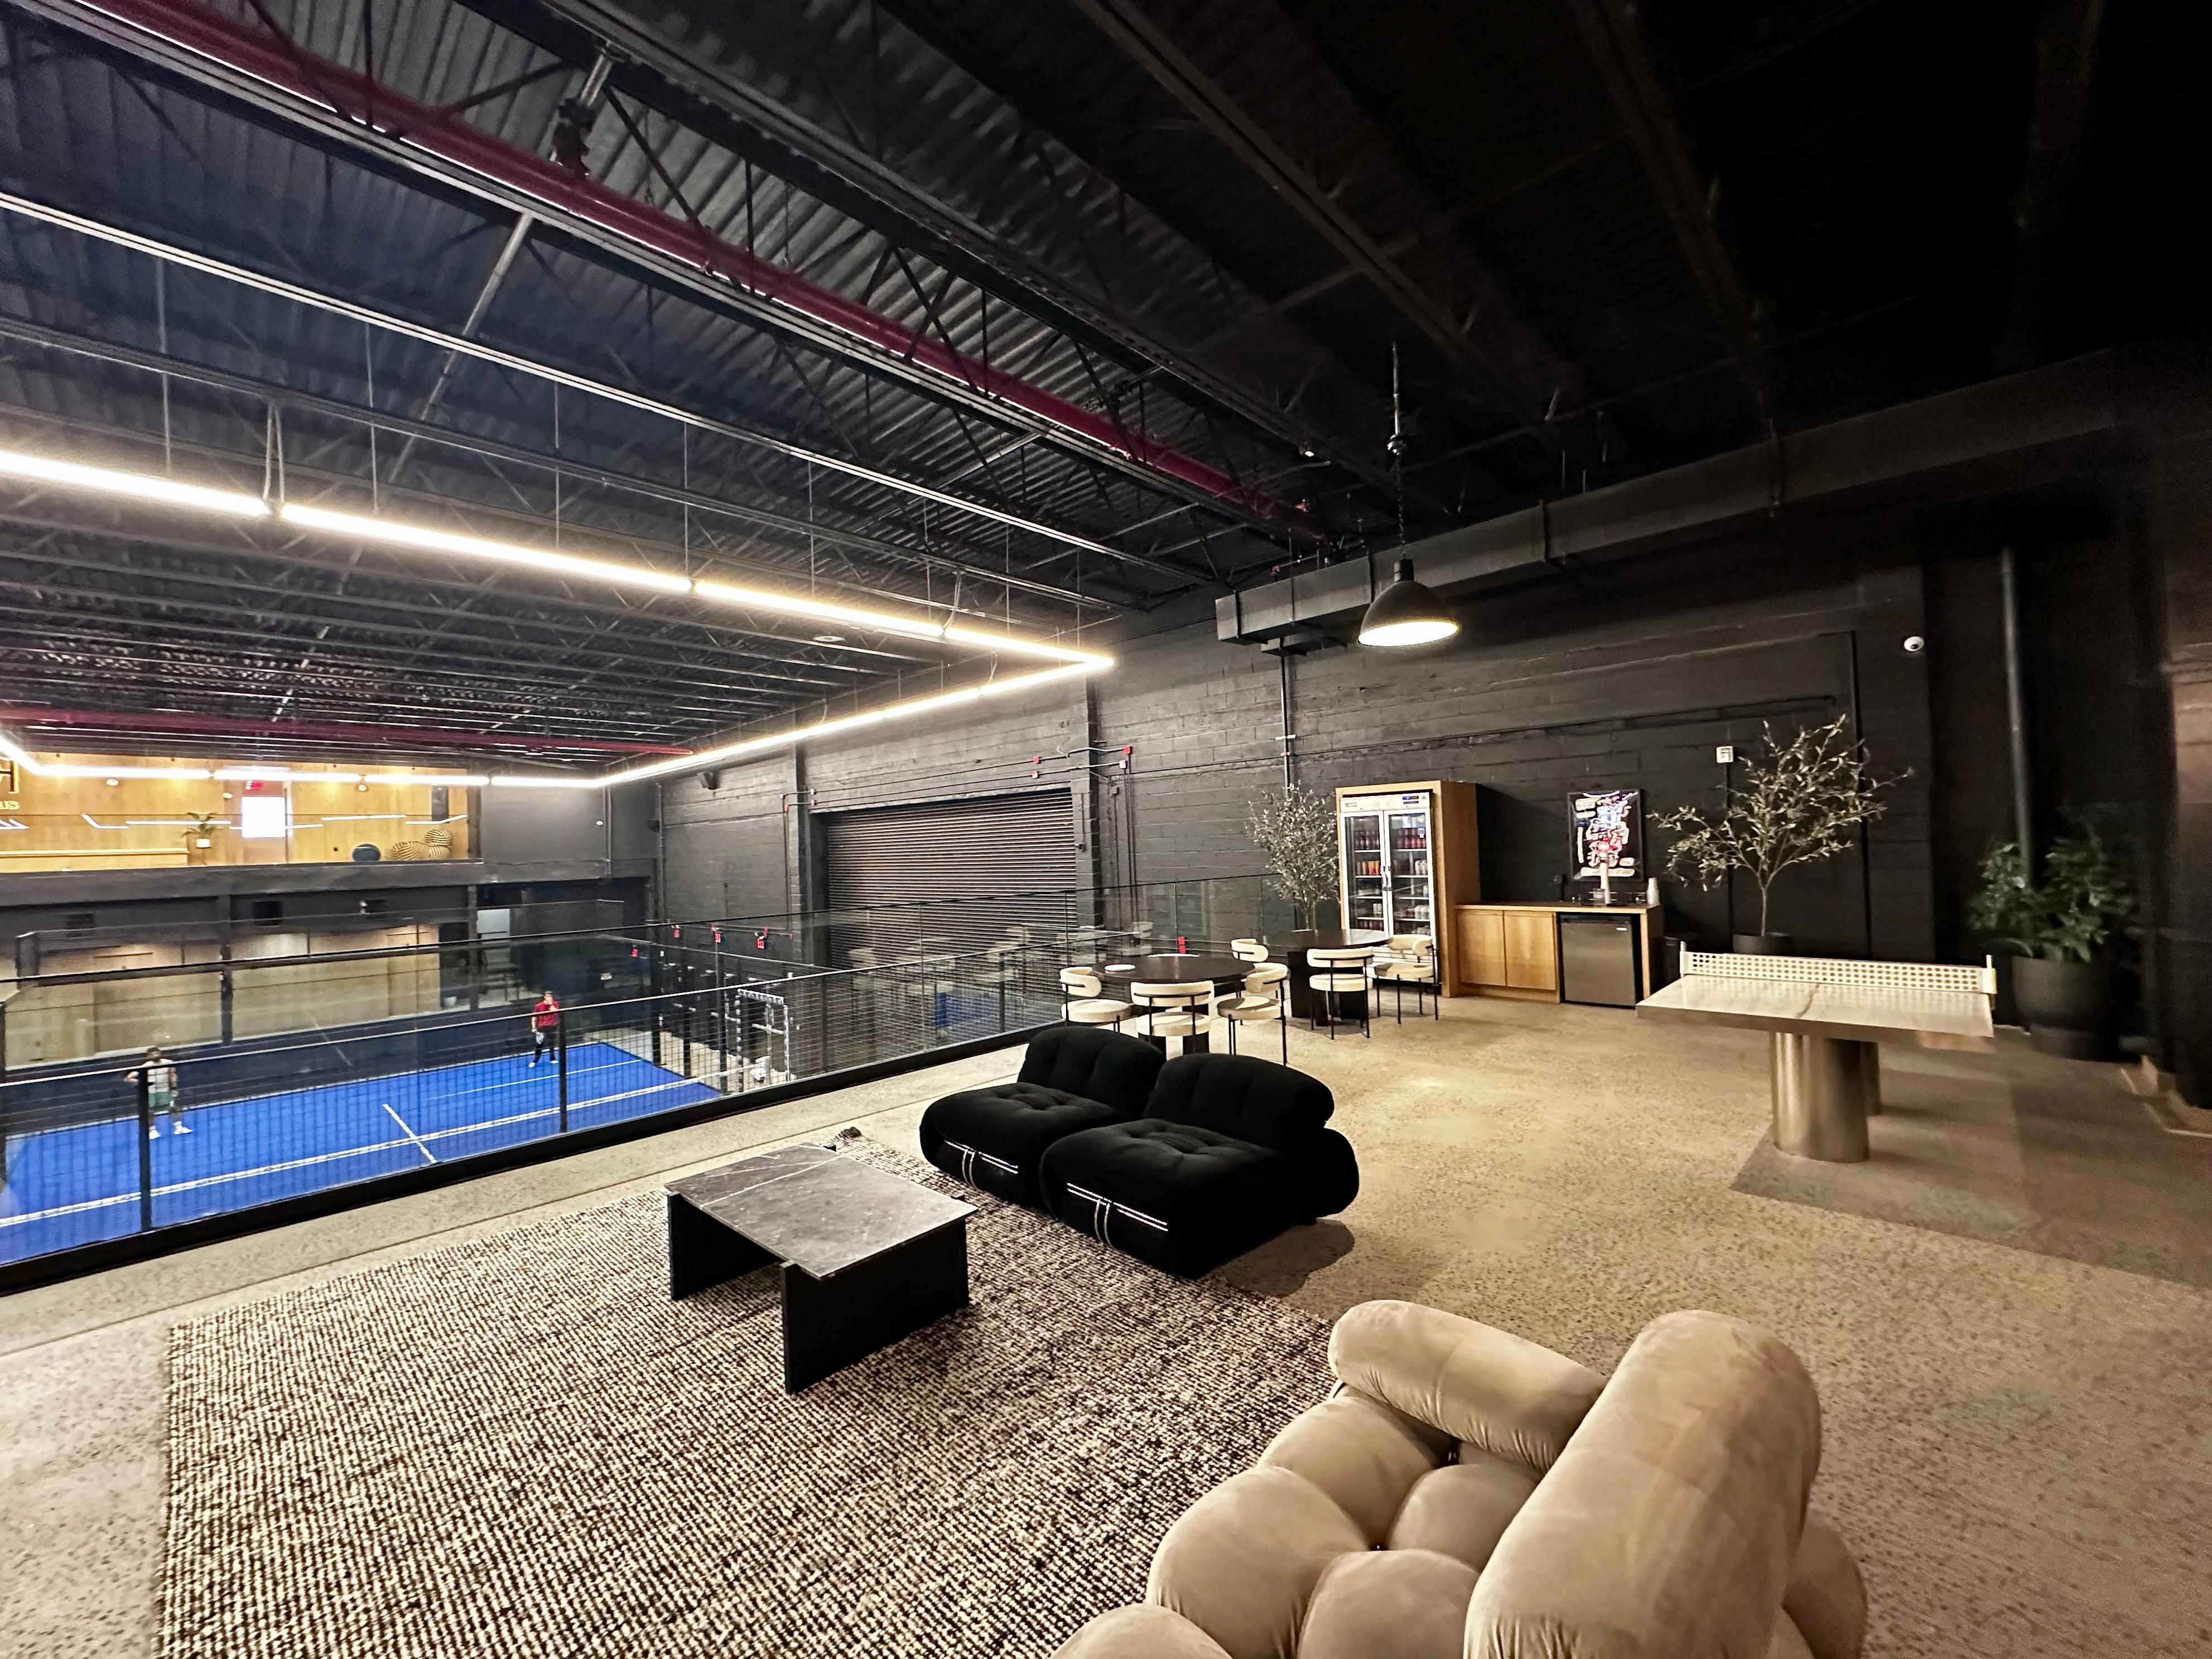 <p>NYC's Padel Haus locations had more than 300 members in May, up from 190 in October 2023.</p><p>Membership fees are on par with other high-end gyms in the city. They include a one-time $490 initiation fee, up to $180 in monthly payments, and a $25 to $40 fee to book a court.</p><p>It's selling more than just a place for exercise. Padel Haus is also a juice bar, a coworking space, and the Dumbo location had some light workout equipment.</p><p>Some members come in every day just to work remotely without ever setting foot on the court.</p><p>And luxury brands are cashing in on the padel lifestyle. Prada and Versace have both released designer padel rackets that sell for well over $1,000.</p>